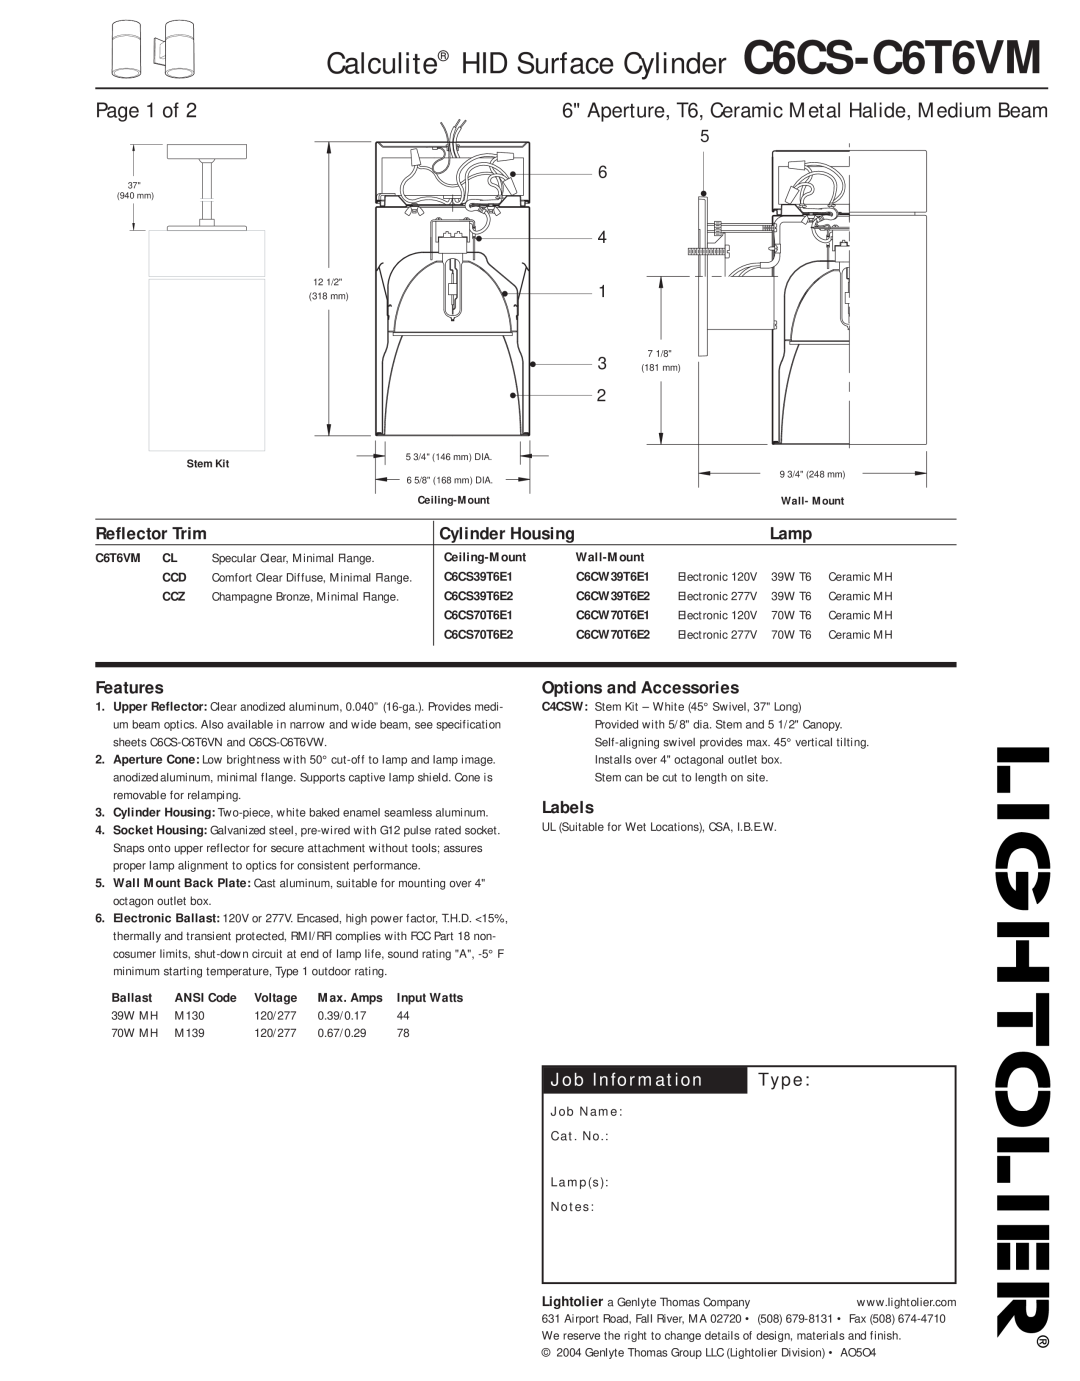 Lightolier specifications Page 1 of, Job Information, Type, Calculite HID Surface Cylinder C6CS-C6T6VM, Lamp, Features 